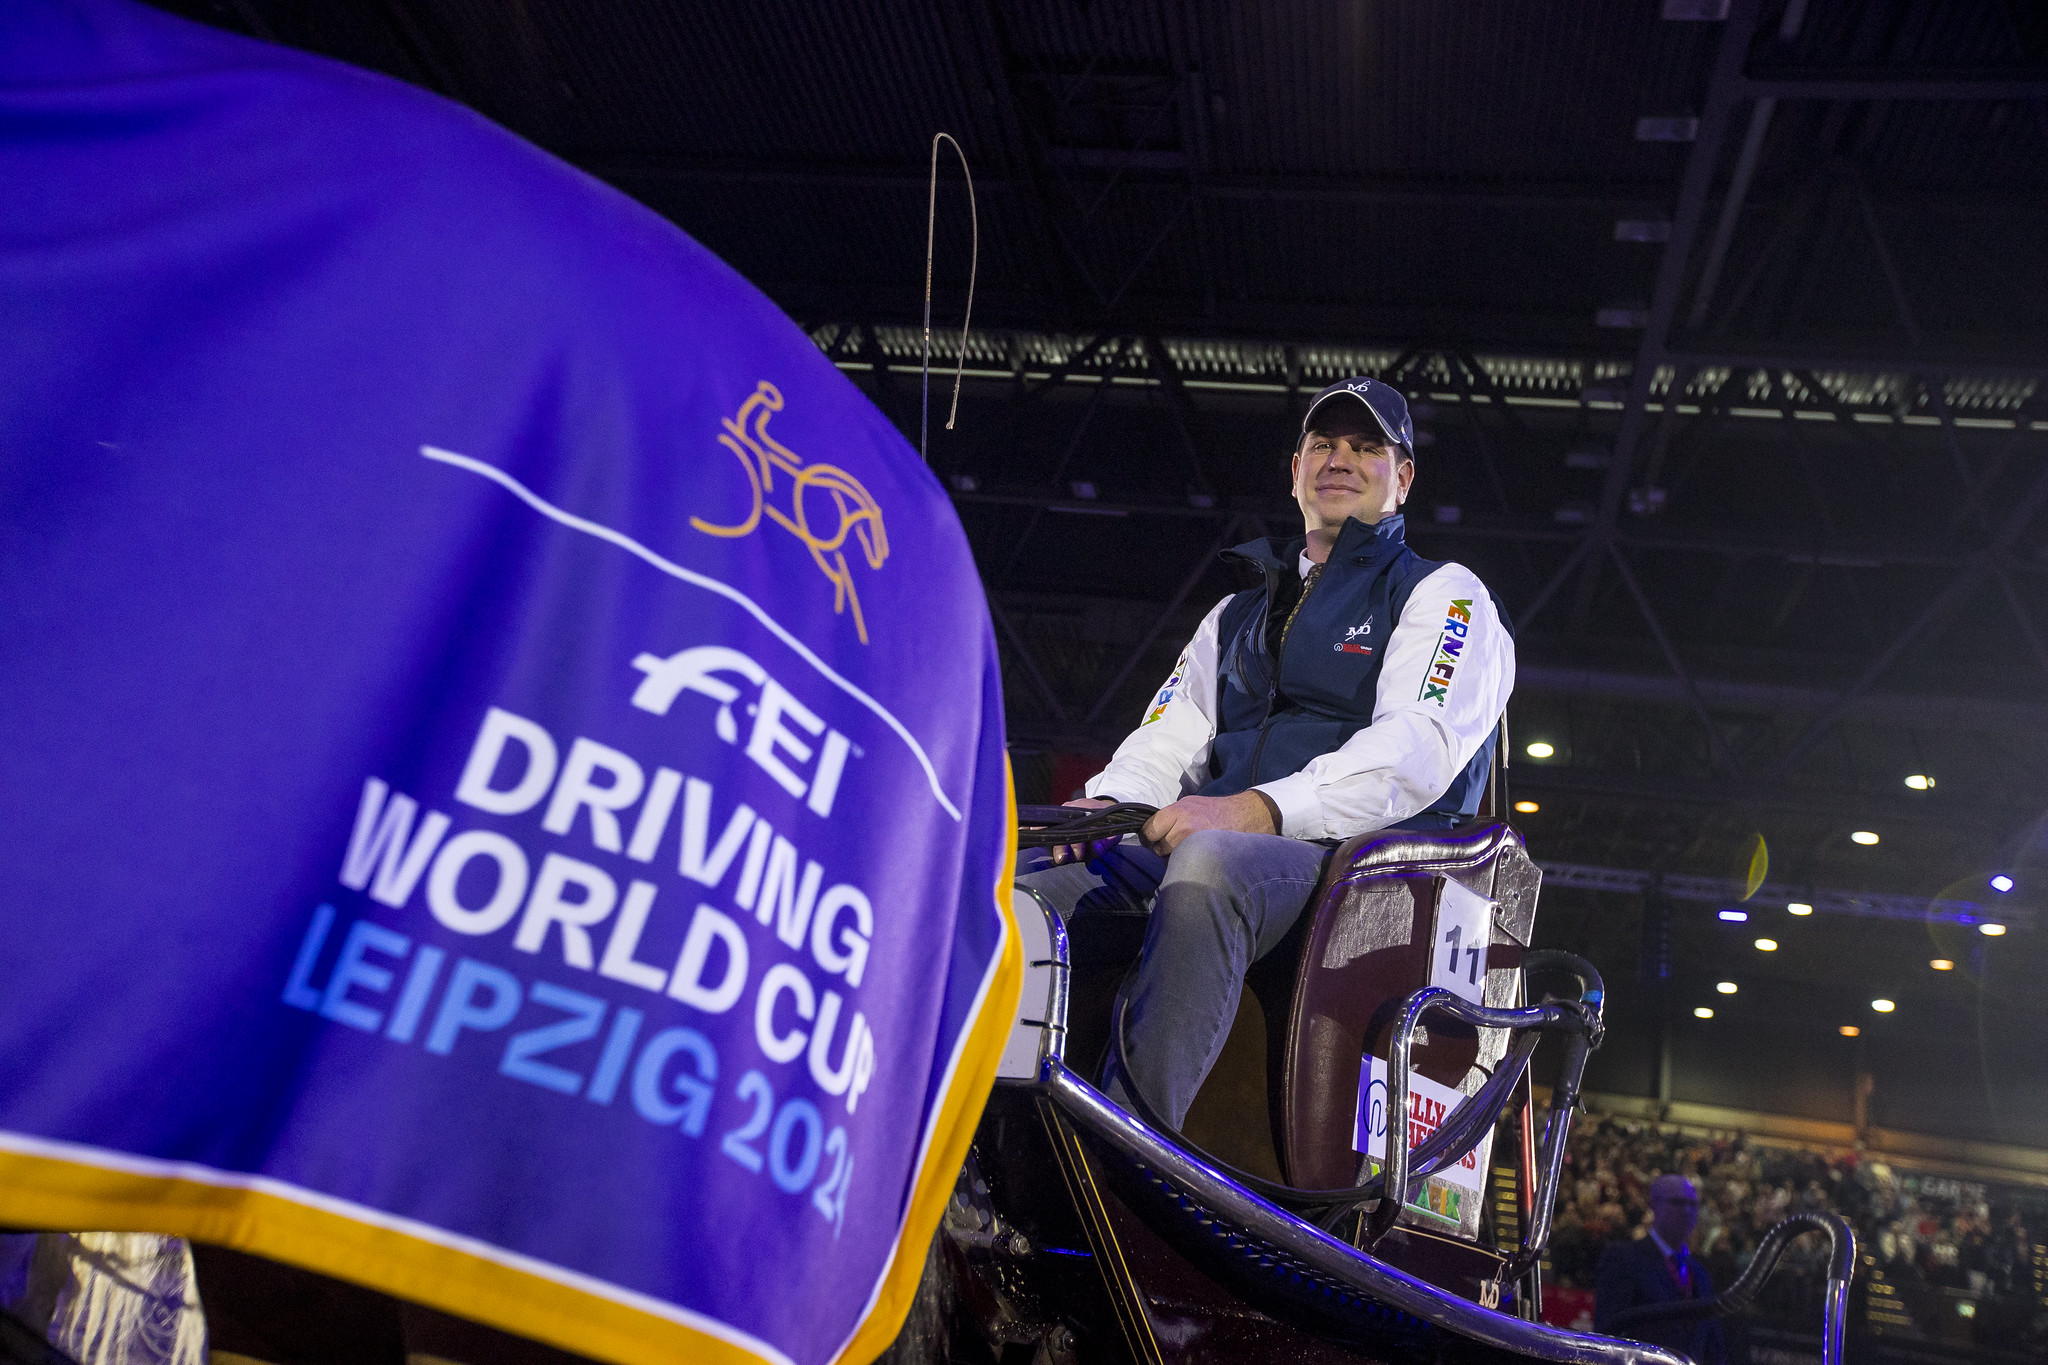 Swapping Shoes for a carriage: Dries Degrieck topples the champions to lead at Leipzig